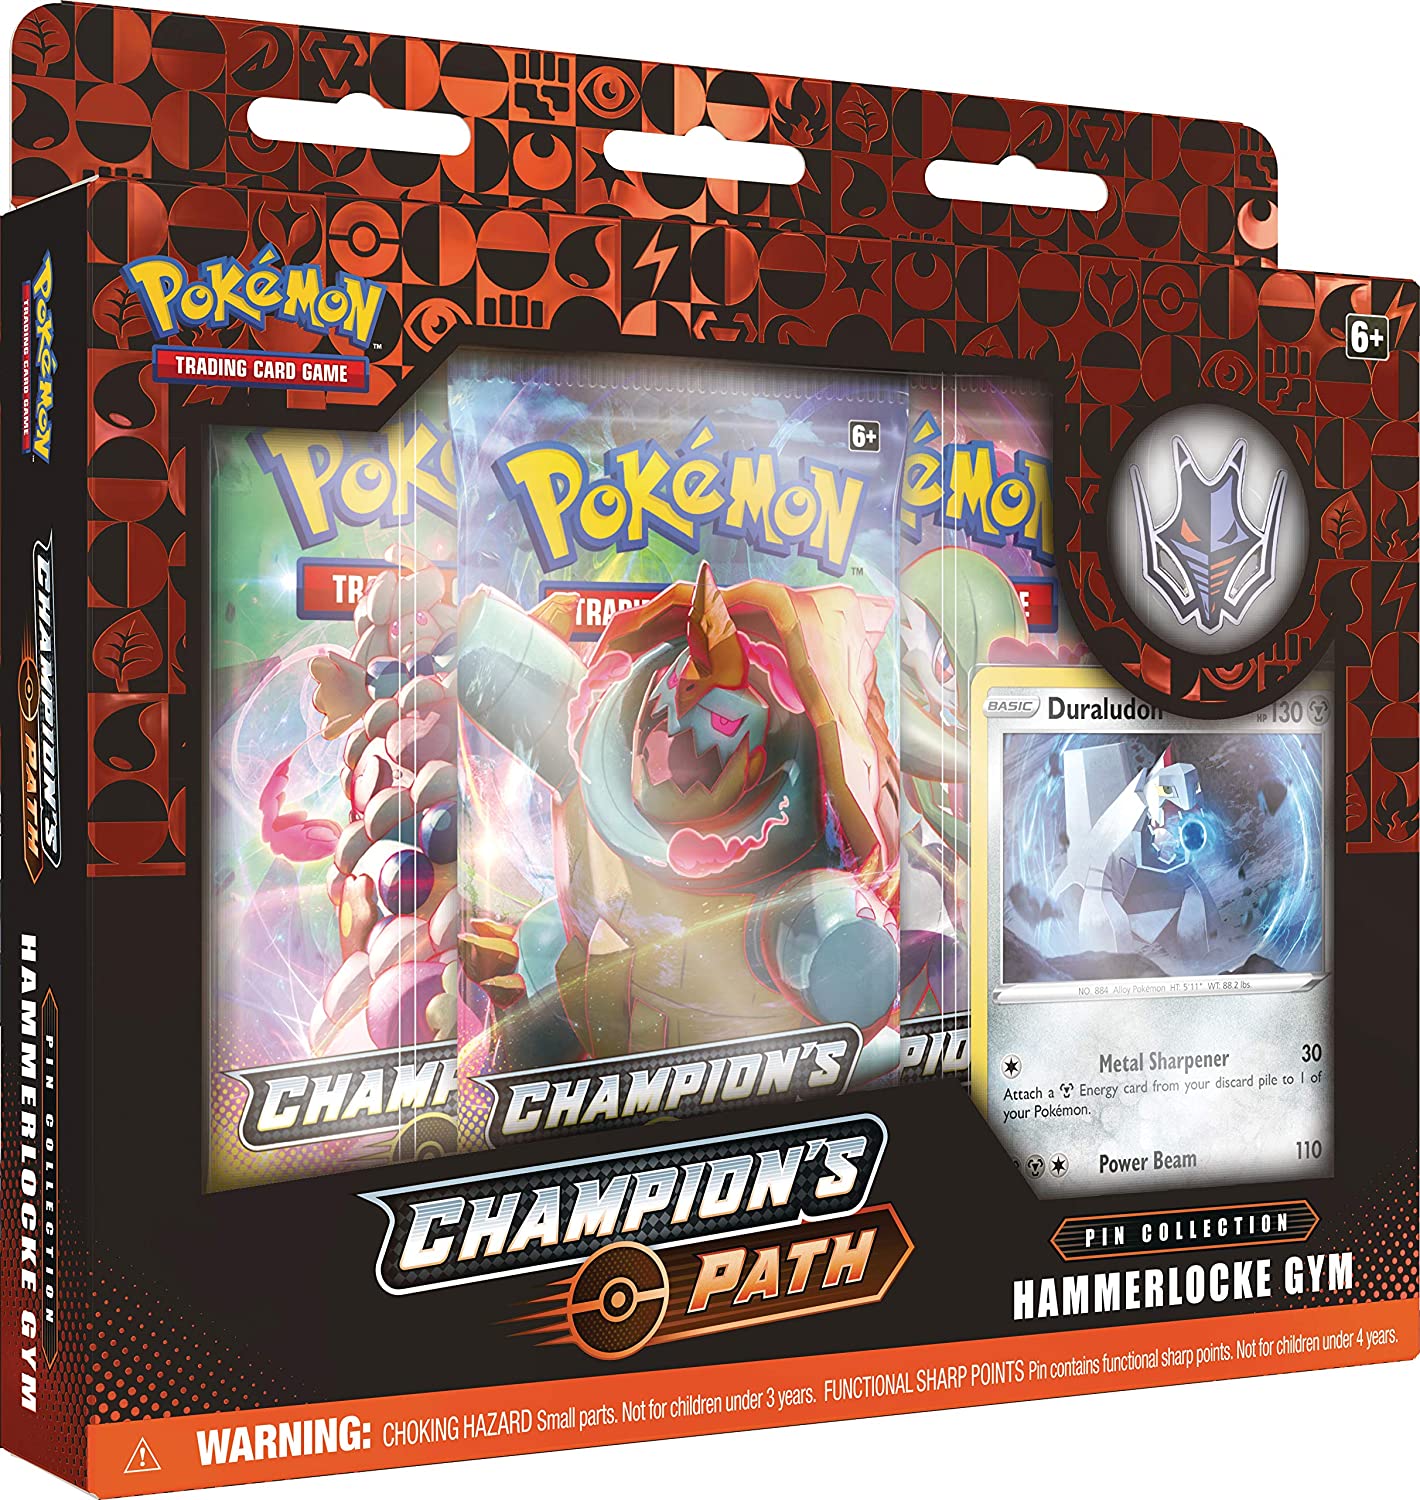 Champions Path - Hammerlocke Gym Special Pin Collection Box